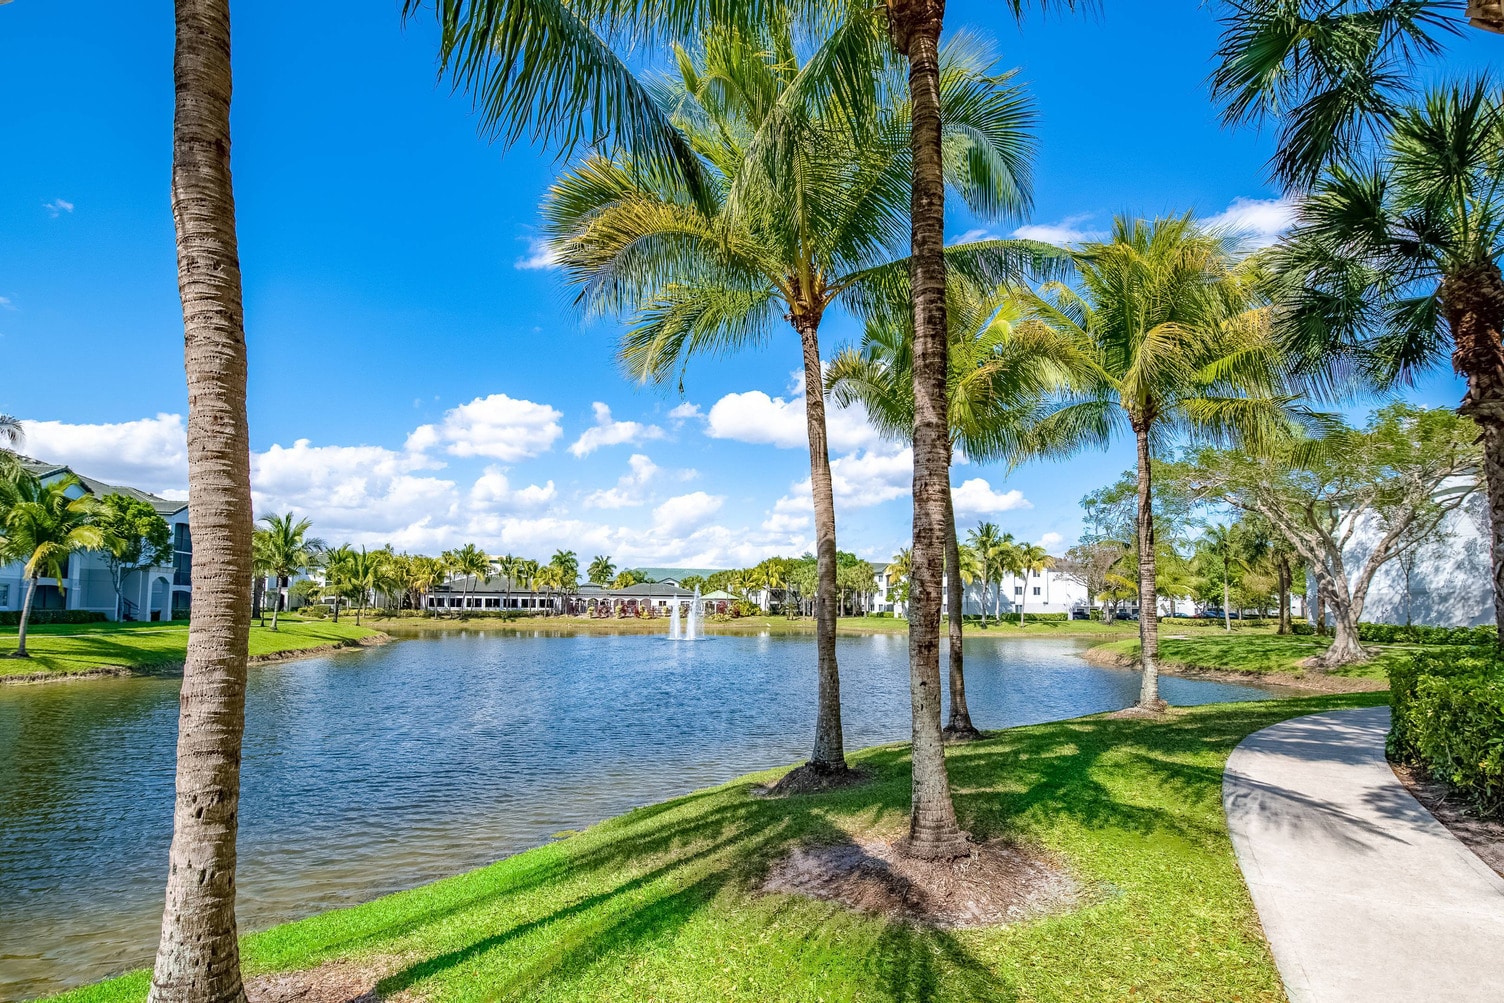 Palm Trace Landings Apartments | Apartments in Davie, FL